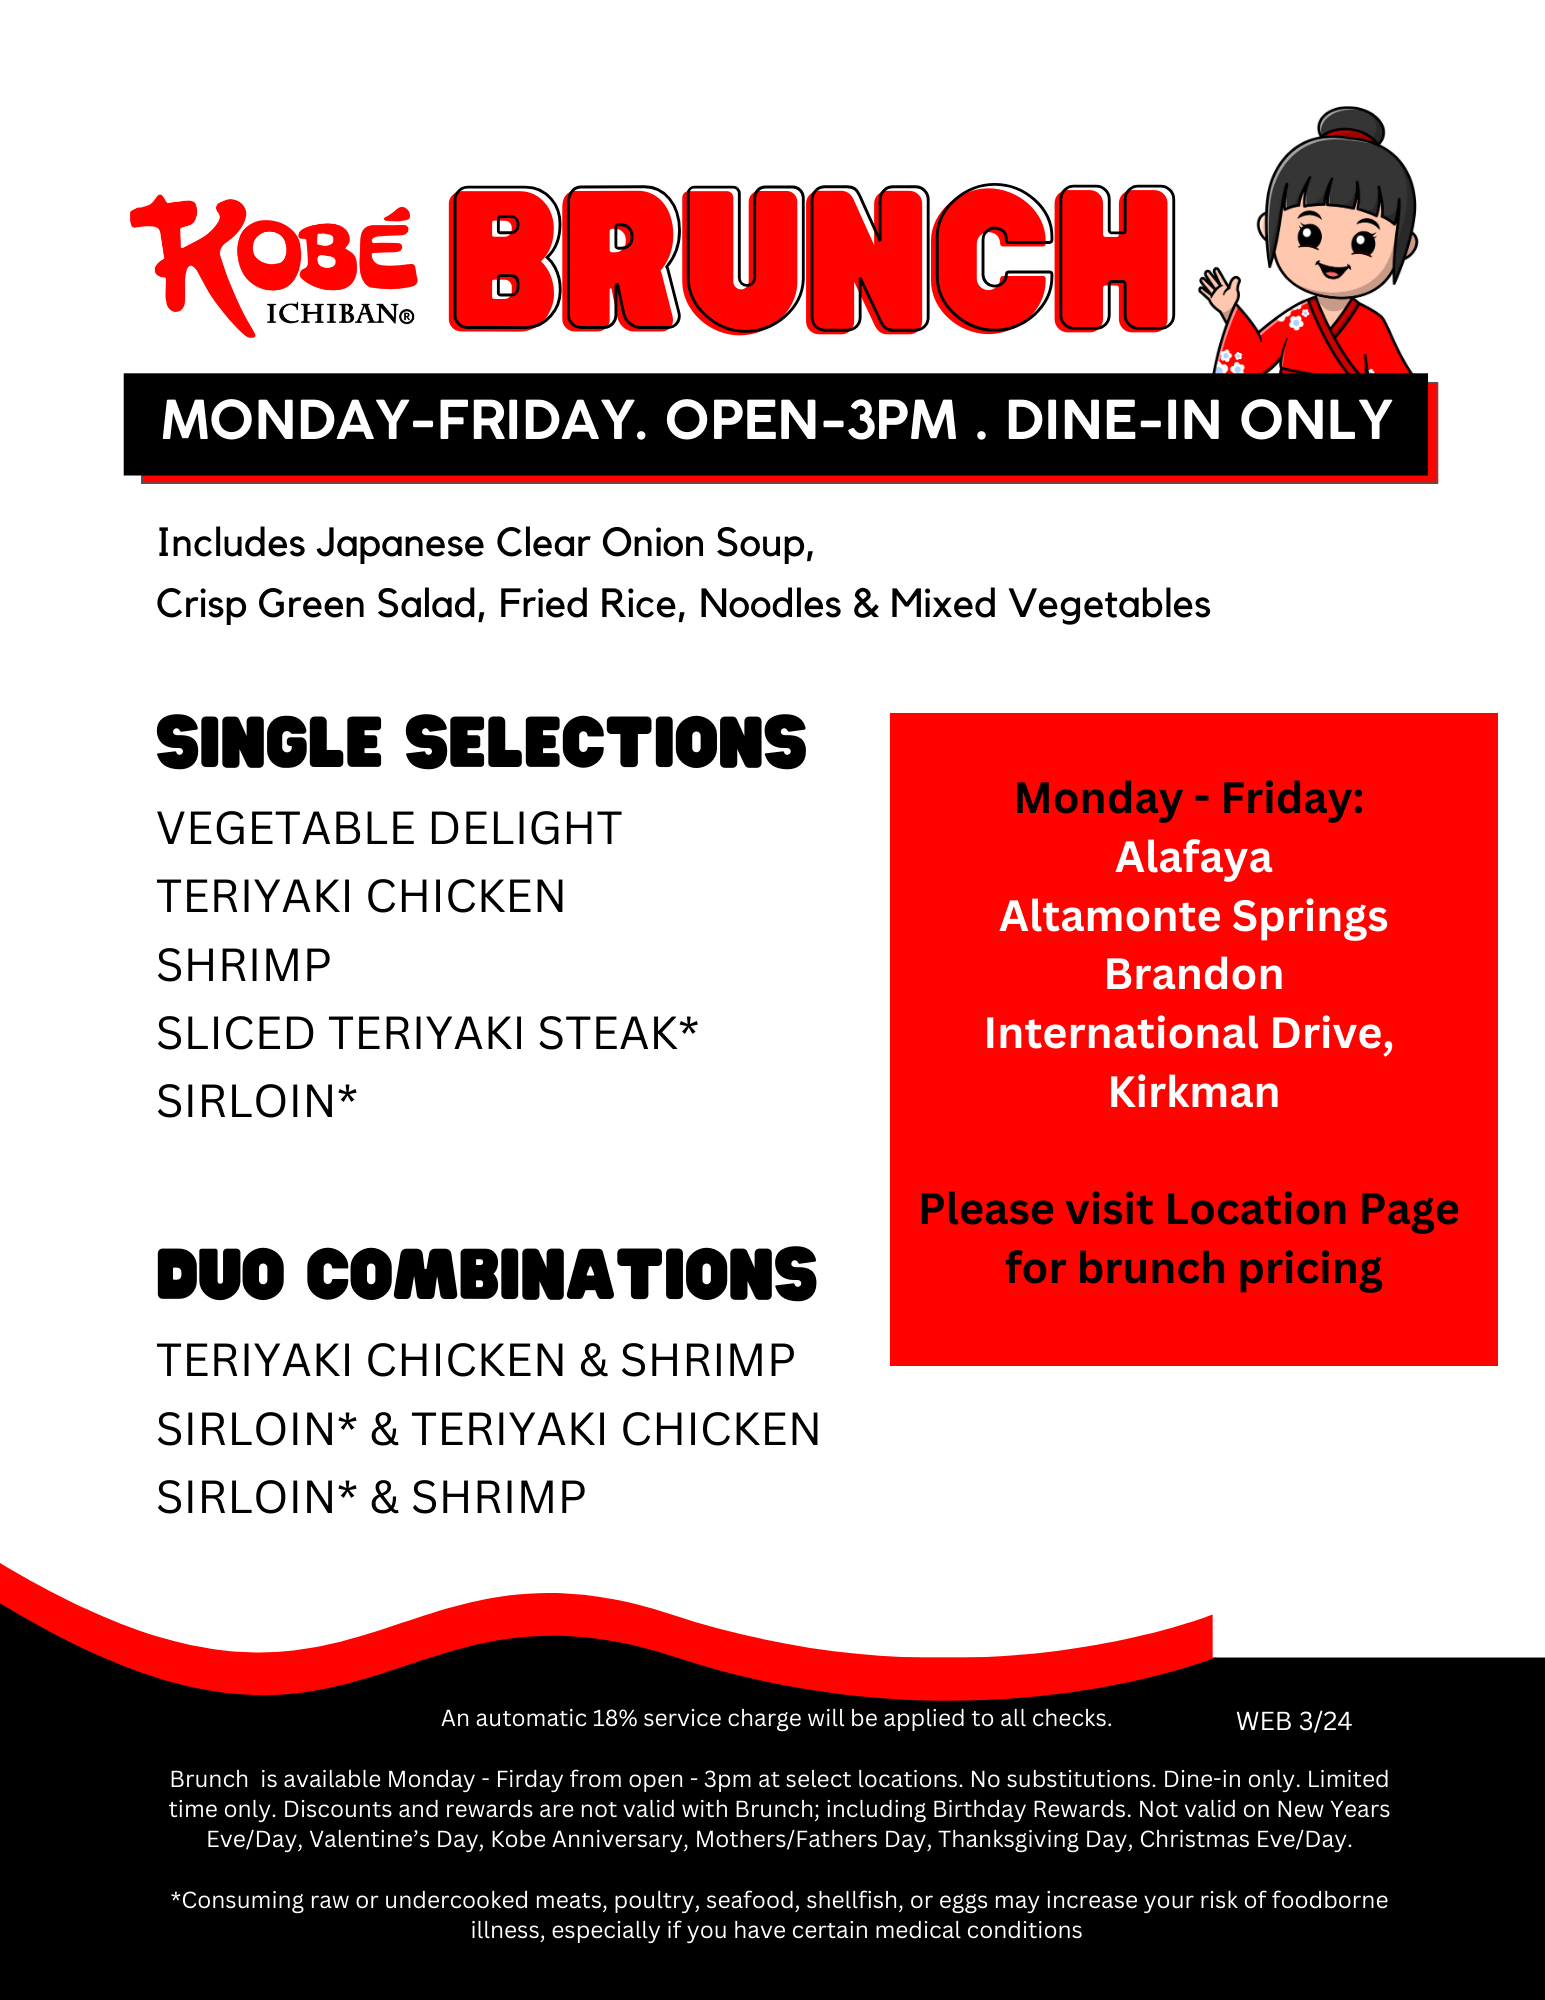 Brunch. Monday-Friday. Open-3pm . DINE-IN ONLY. Includes Japanese Clear Onion Soup, Crisp Green Salad, Fried Rice, Noodles & Mixed Vegetables single selections VEGETABLE DELIGHT TERIYAKI CHICKEN SHRIMP SLICED TERIYAKI STEAK* SIRLOIN* DUO combinations TERIYAKI CHICKEN & SHRIMP SIRLOIN* & TERIYAKI CHICKEN SIRLOIN* & SHRIMP. Monday - Friday: Alafaya Altamonte Springs Brandon International Drive, Kirkman Please visit Location Page for brunch pricing. An automatic 18% service charge will be applied to all checks. Brunch is available Monday - Firday from open - 3pm at select locations. No substitutions. Dine-in only. Limited time only. Discounts and rewards are not valid with Brunch; including Birthday Rewards. Not valid on New Years Eve/Day, Valentine’s Day, Kobe Anniversary, Mothers/Fathers Day, Thanksgiving Day, Christmas Eve/Day. *Consuming raw or undercooked meats, poultry, seafood, shellfish, or eggs may increase your risk of foodborne illness, especially if you have certain medical conditions 